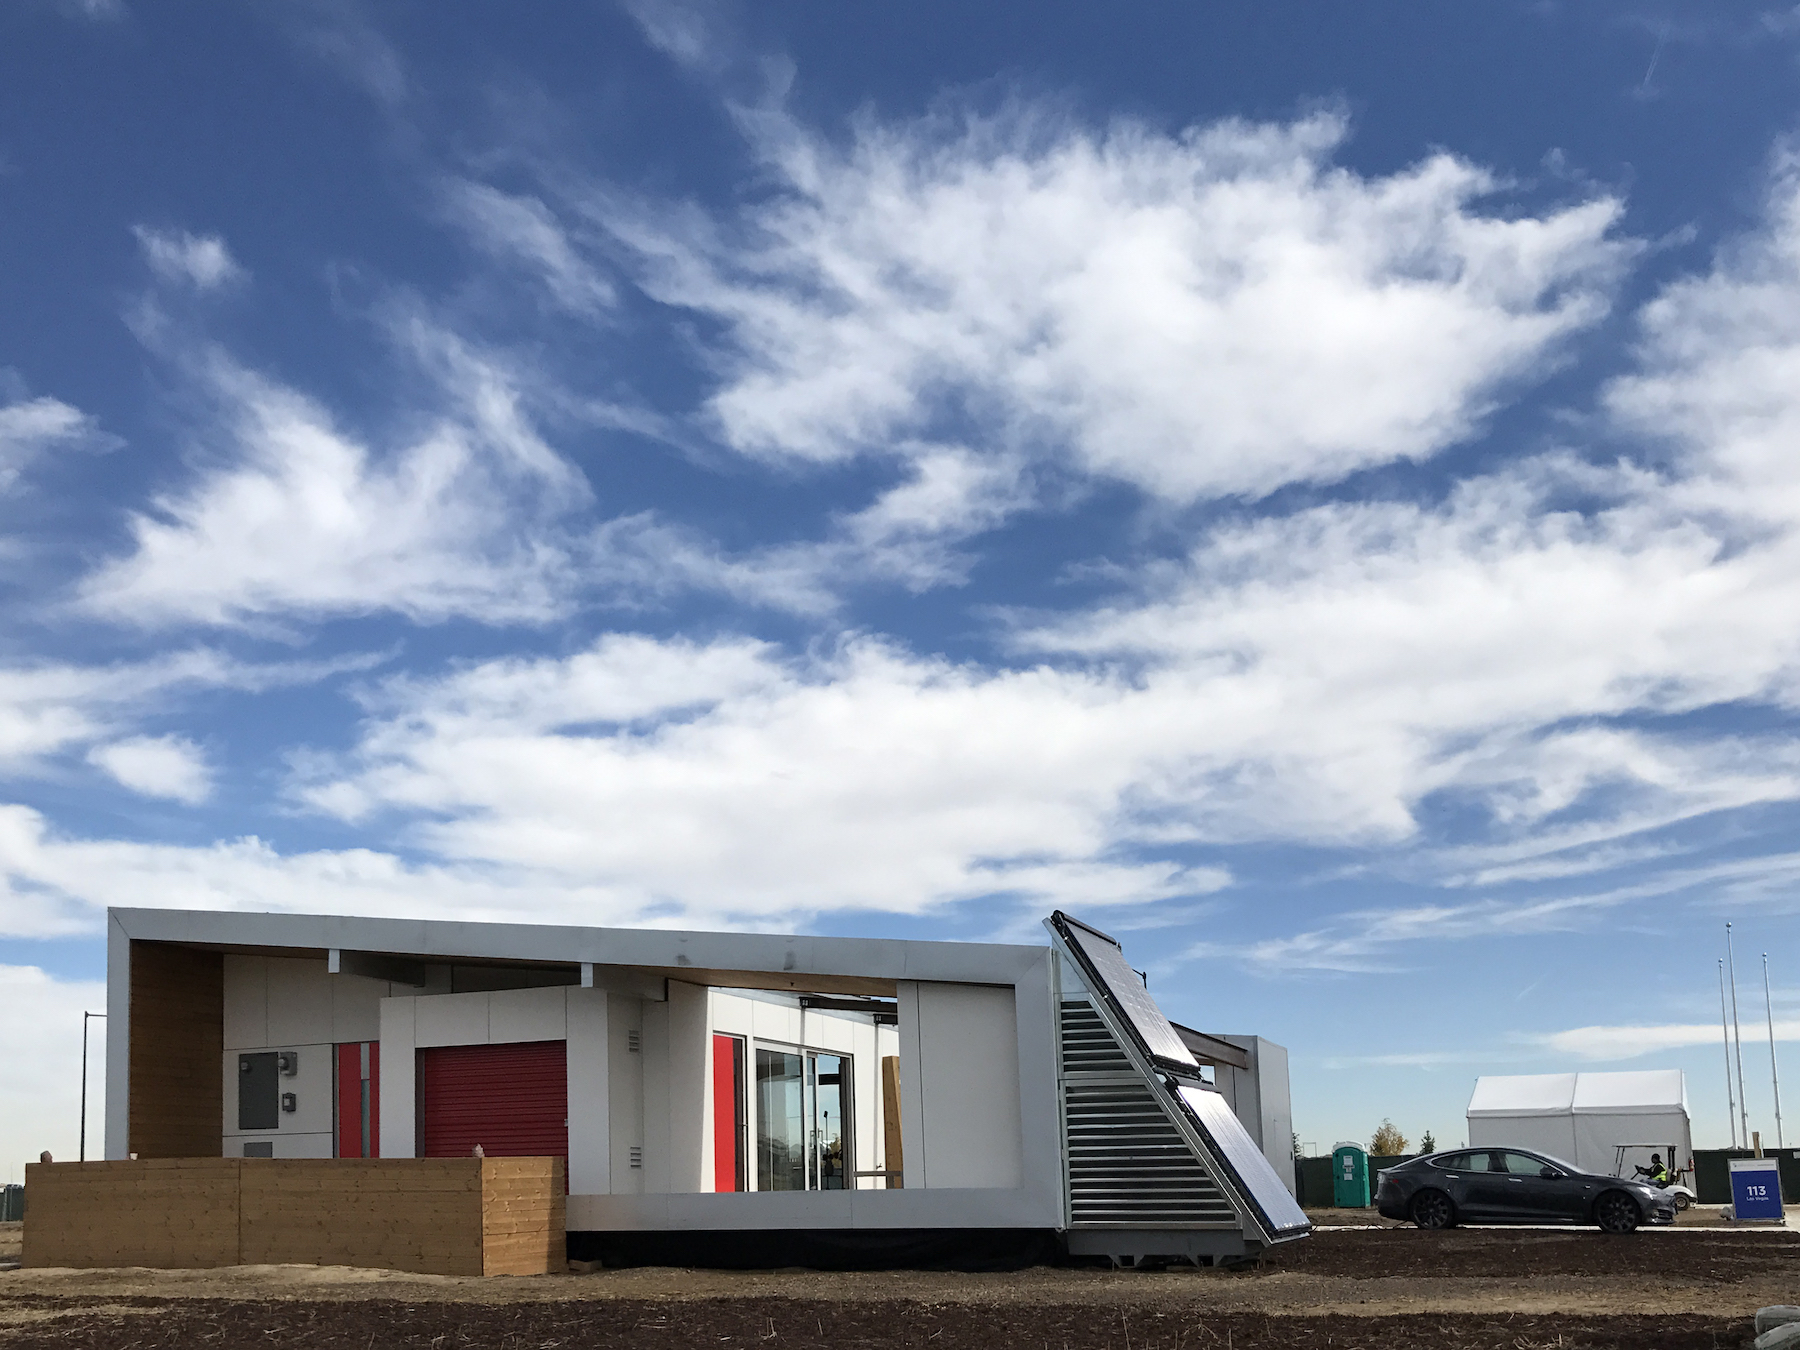 Sinatra Living from the University of Nevada, Las Vegas, team has a solar system for radiant heat and hot water linked to a Tesla Powerwall. The 965-square-foot home combines elegant design and energy smarts.